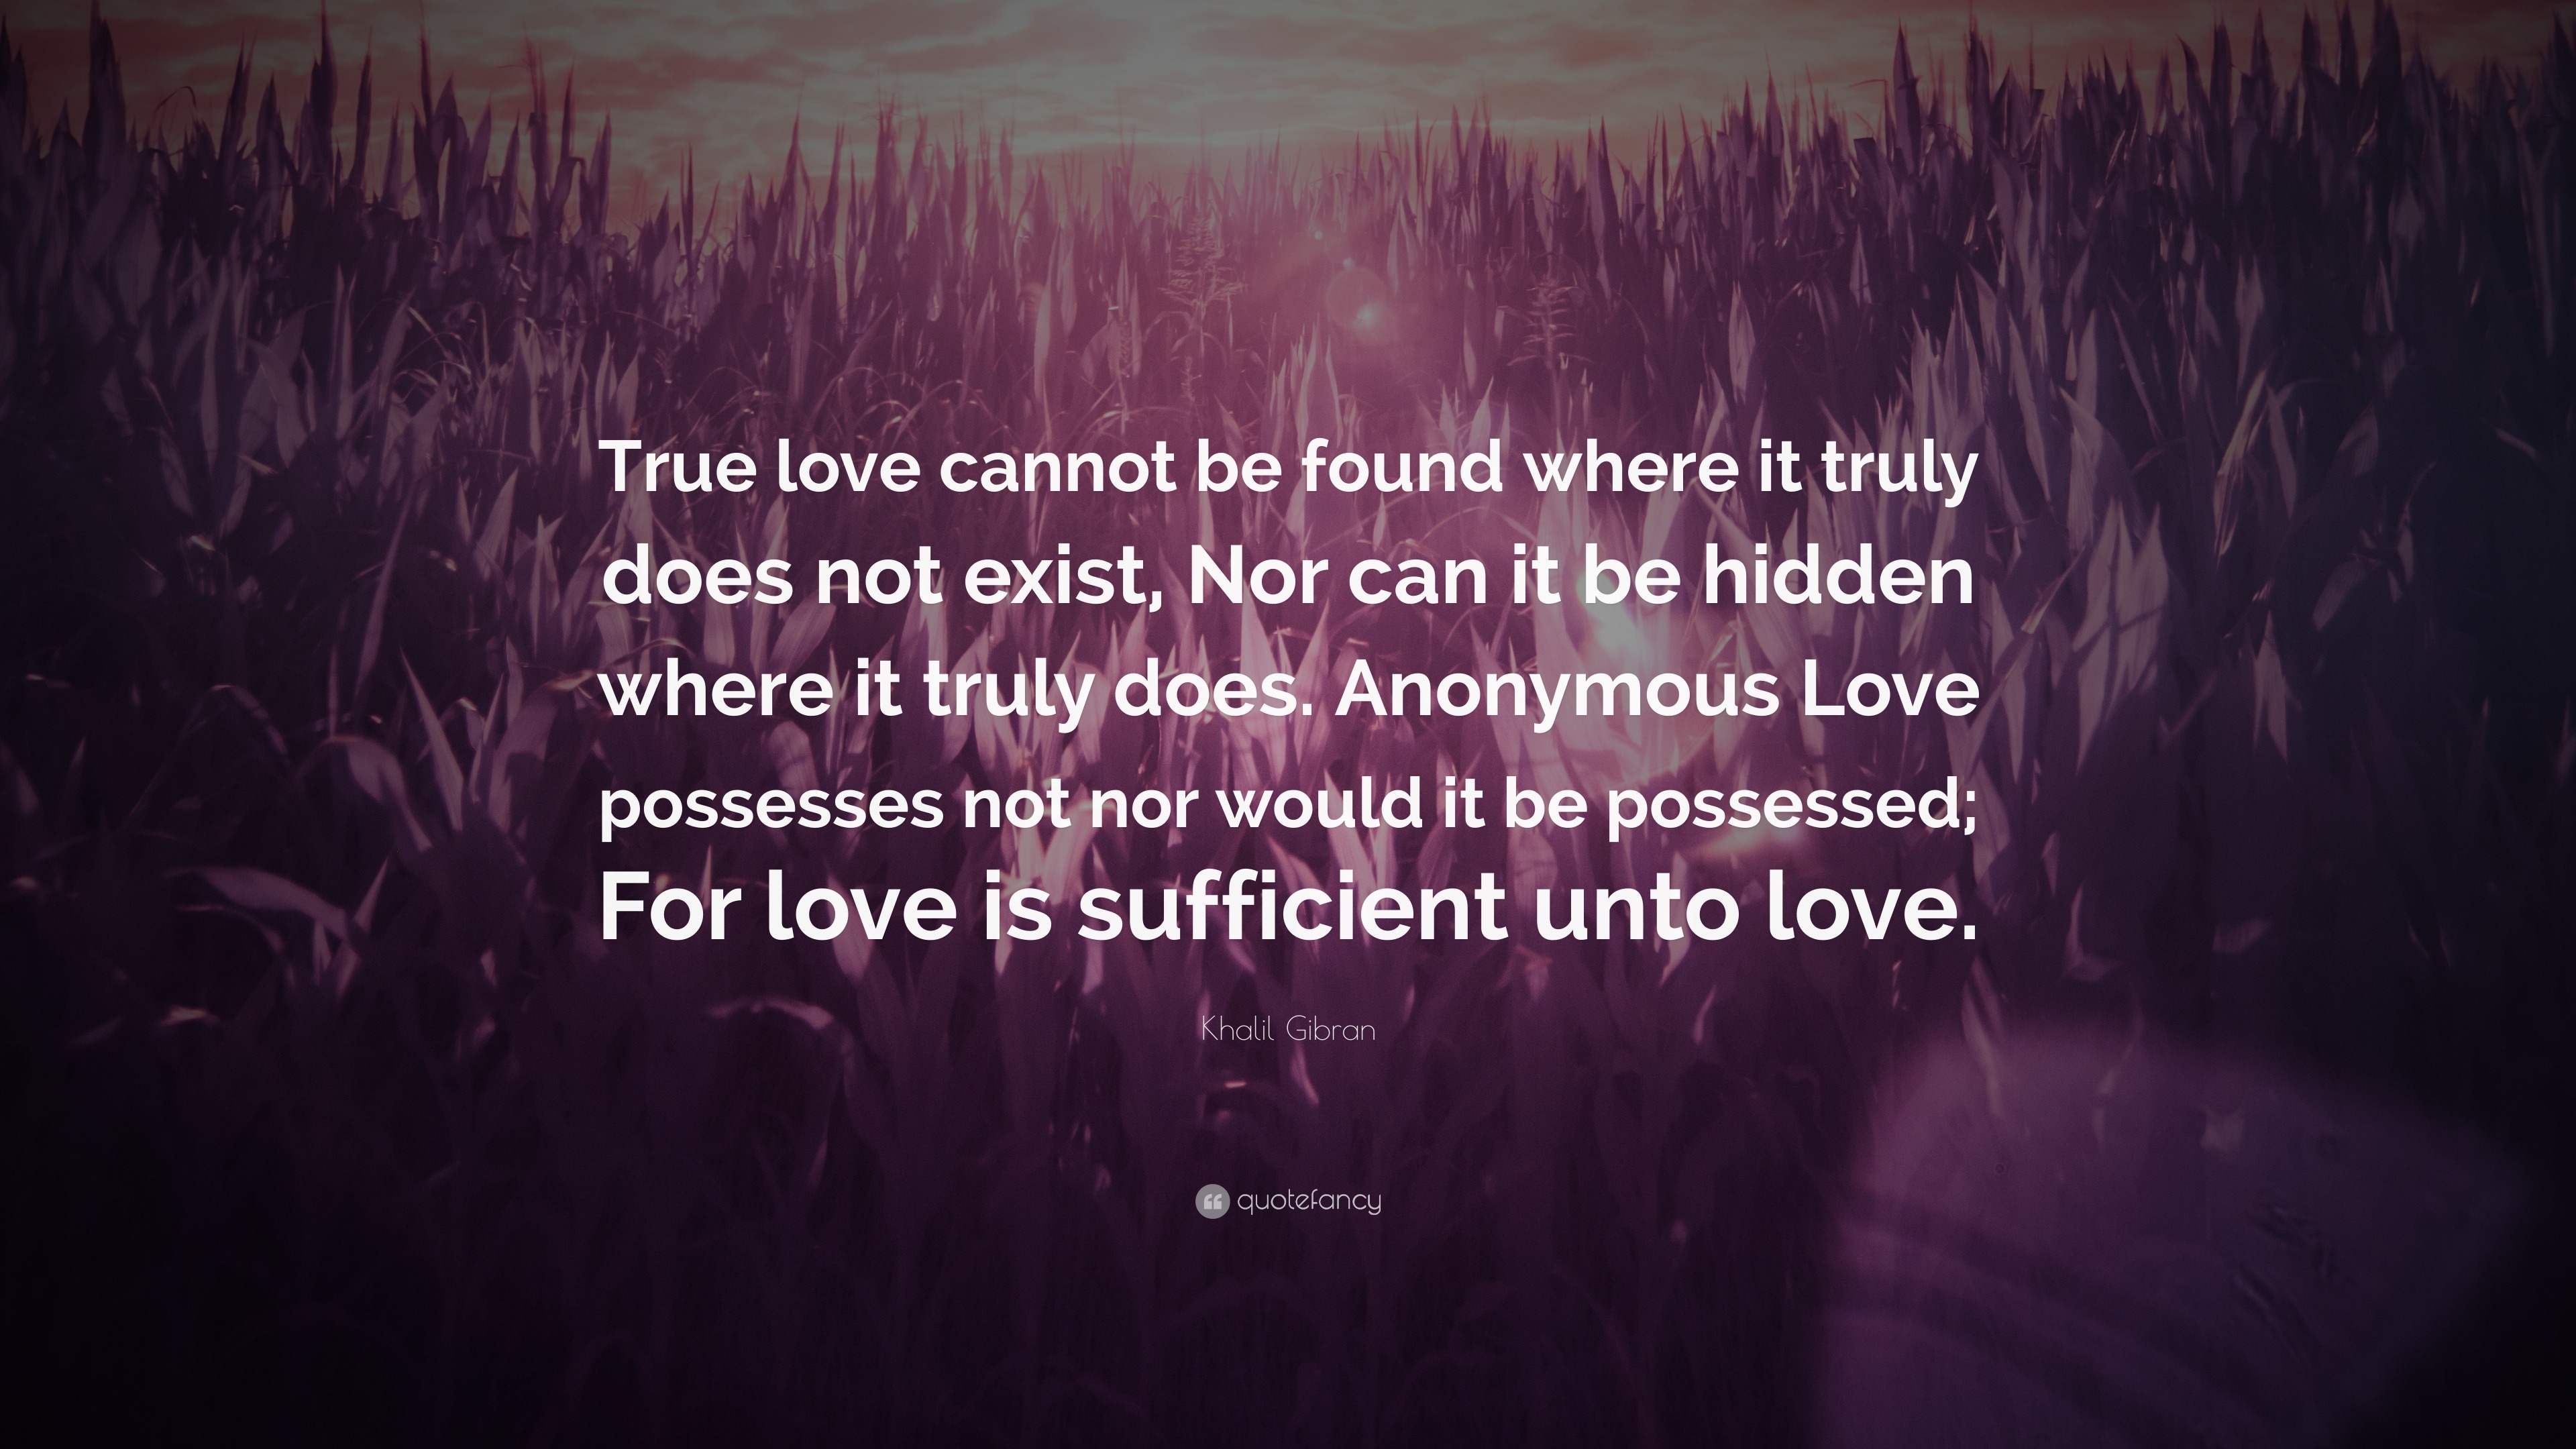 Khalil Gibran Quote: “True love cannot be found where it truly does not  exist, Nor can it be hidden where it truly does. Anonymous Love posses”